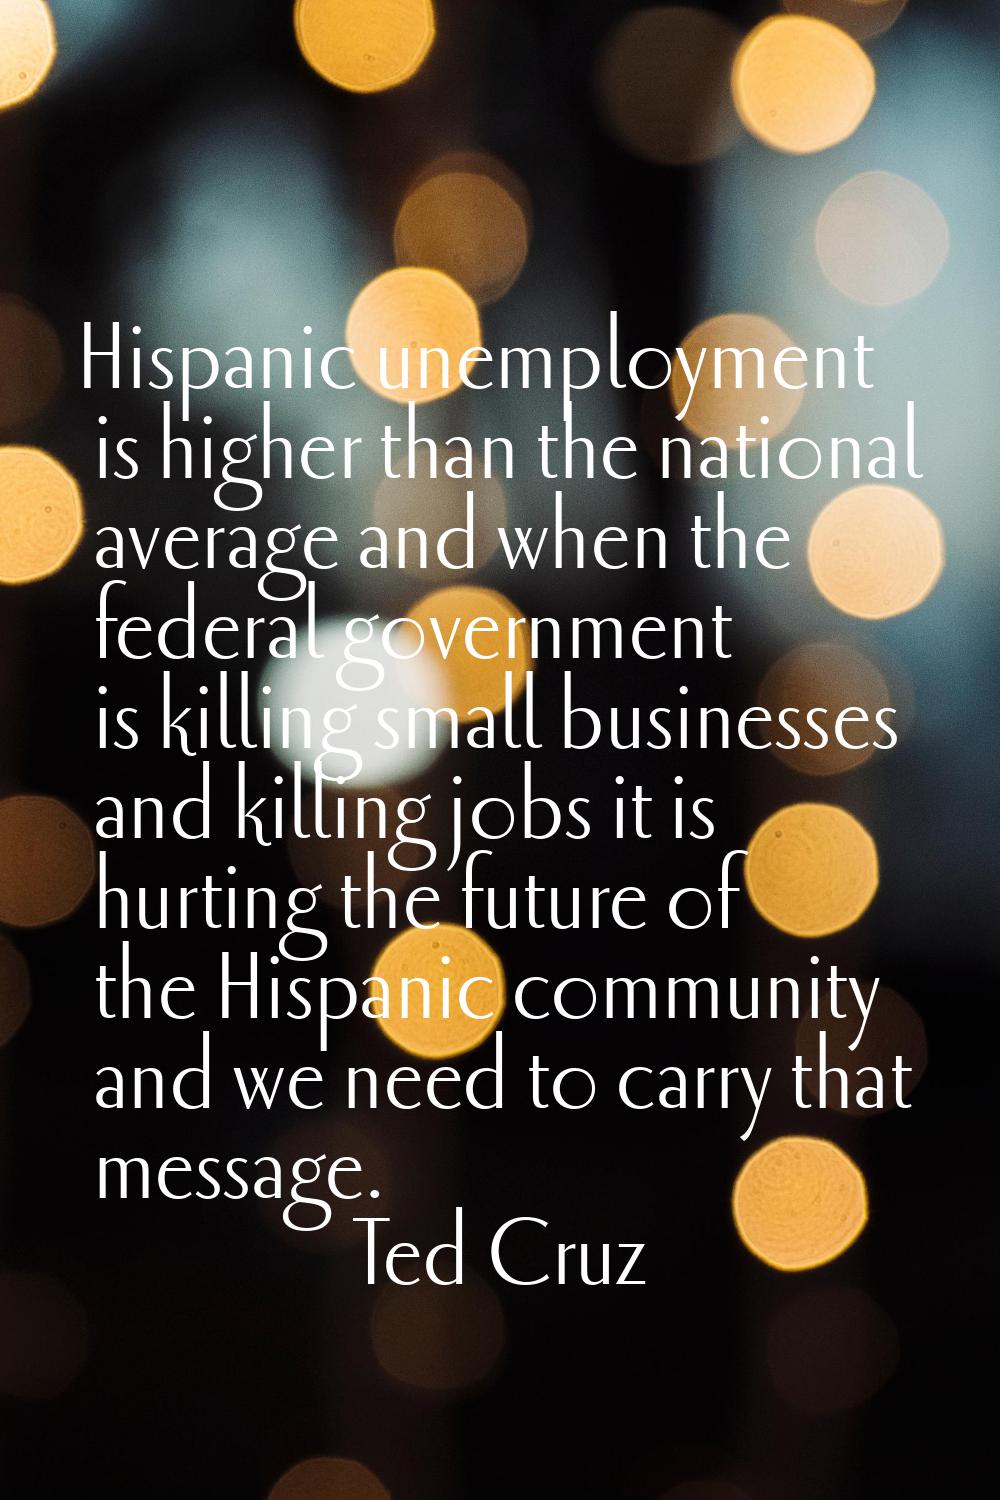 Hispanic unemployment is higher than the national average and when the federal government is killin